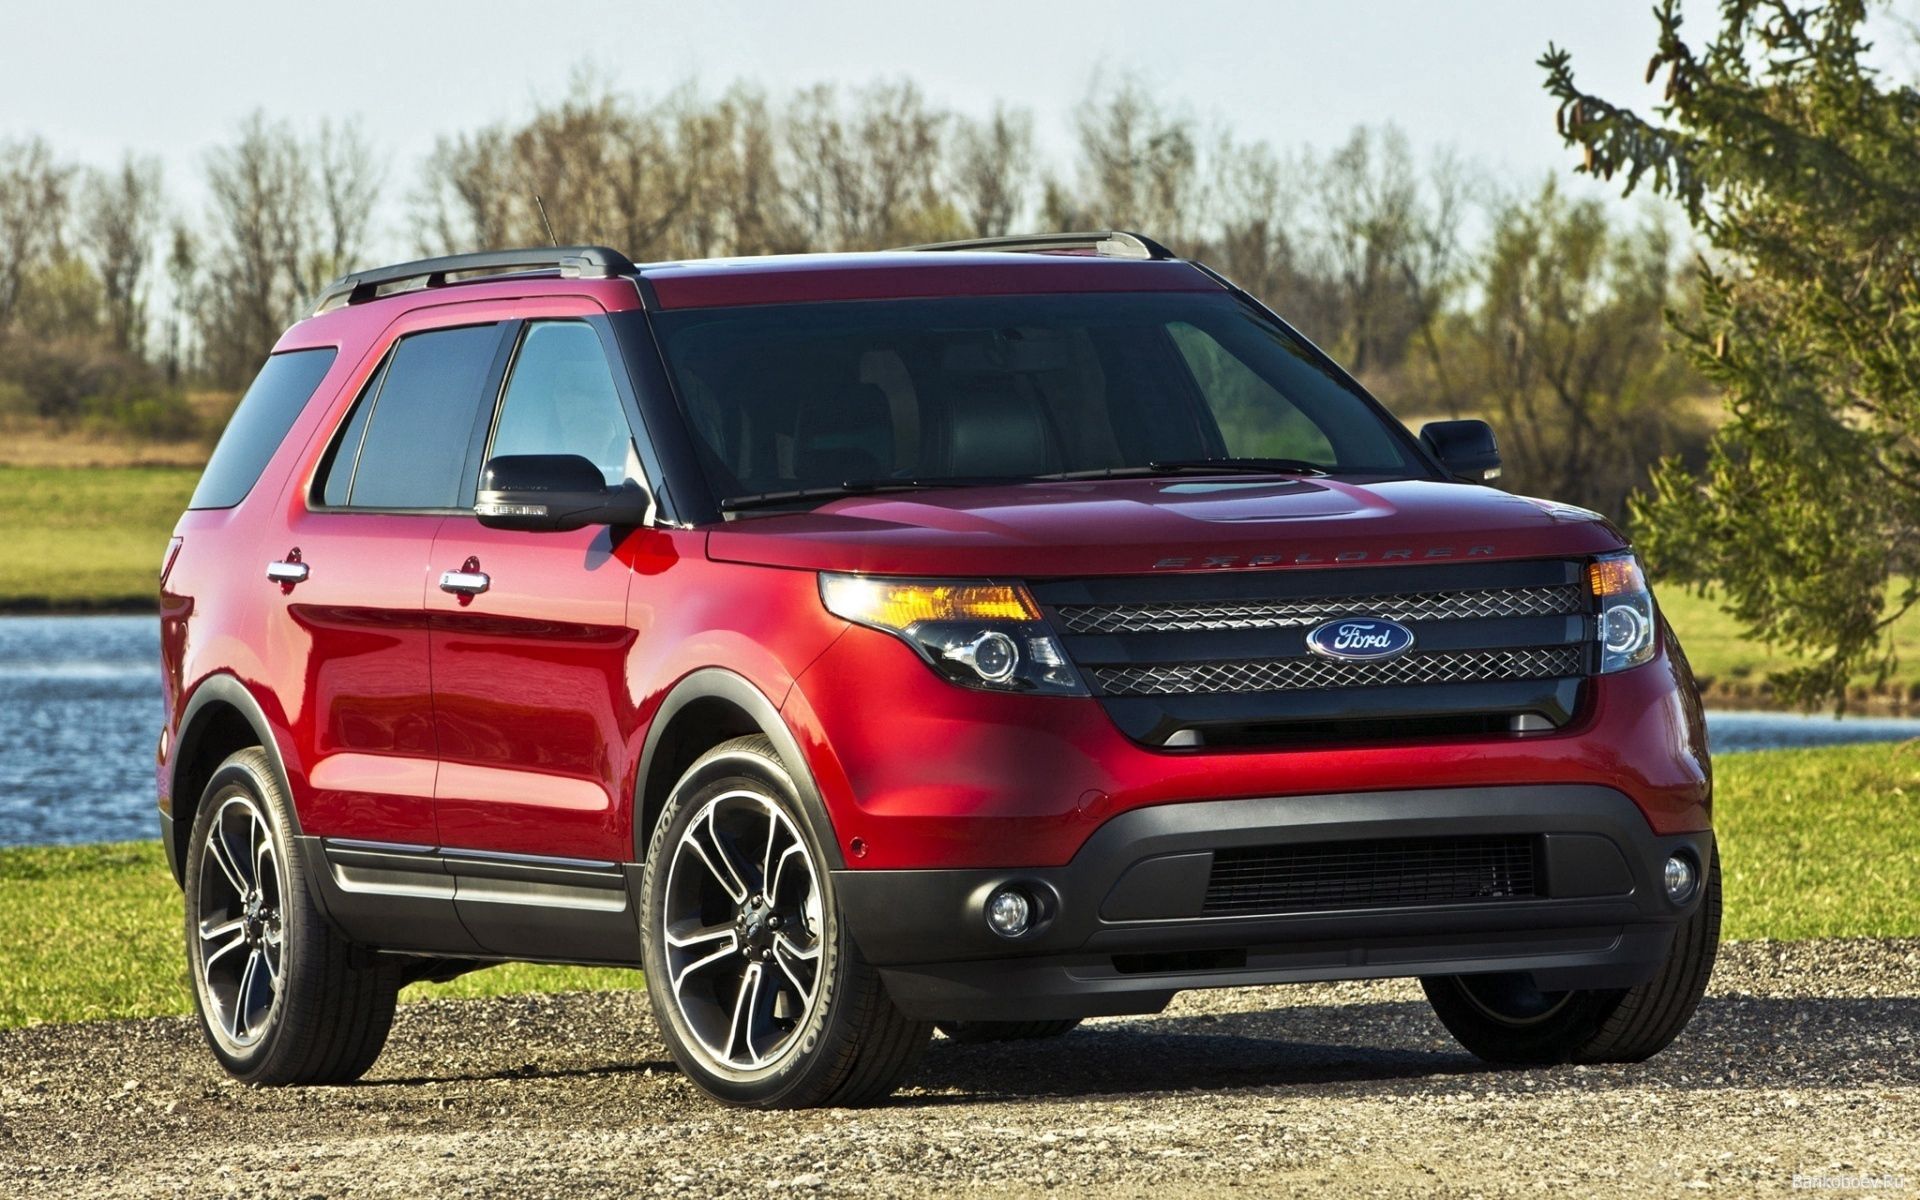 ford, auto, cars, red, ford explorer Desktop Wallpaper